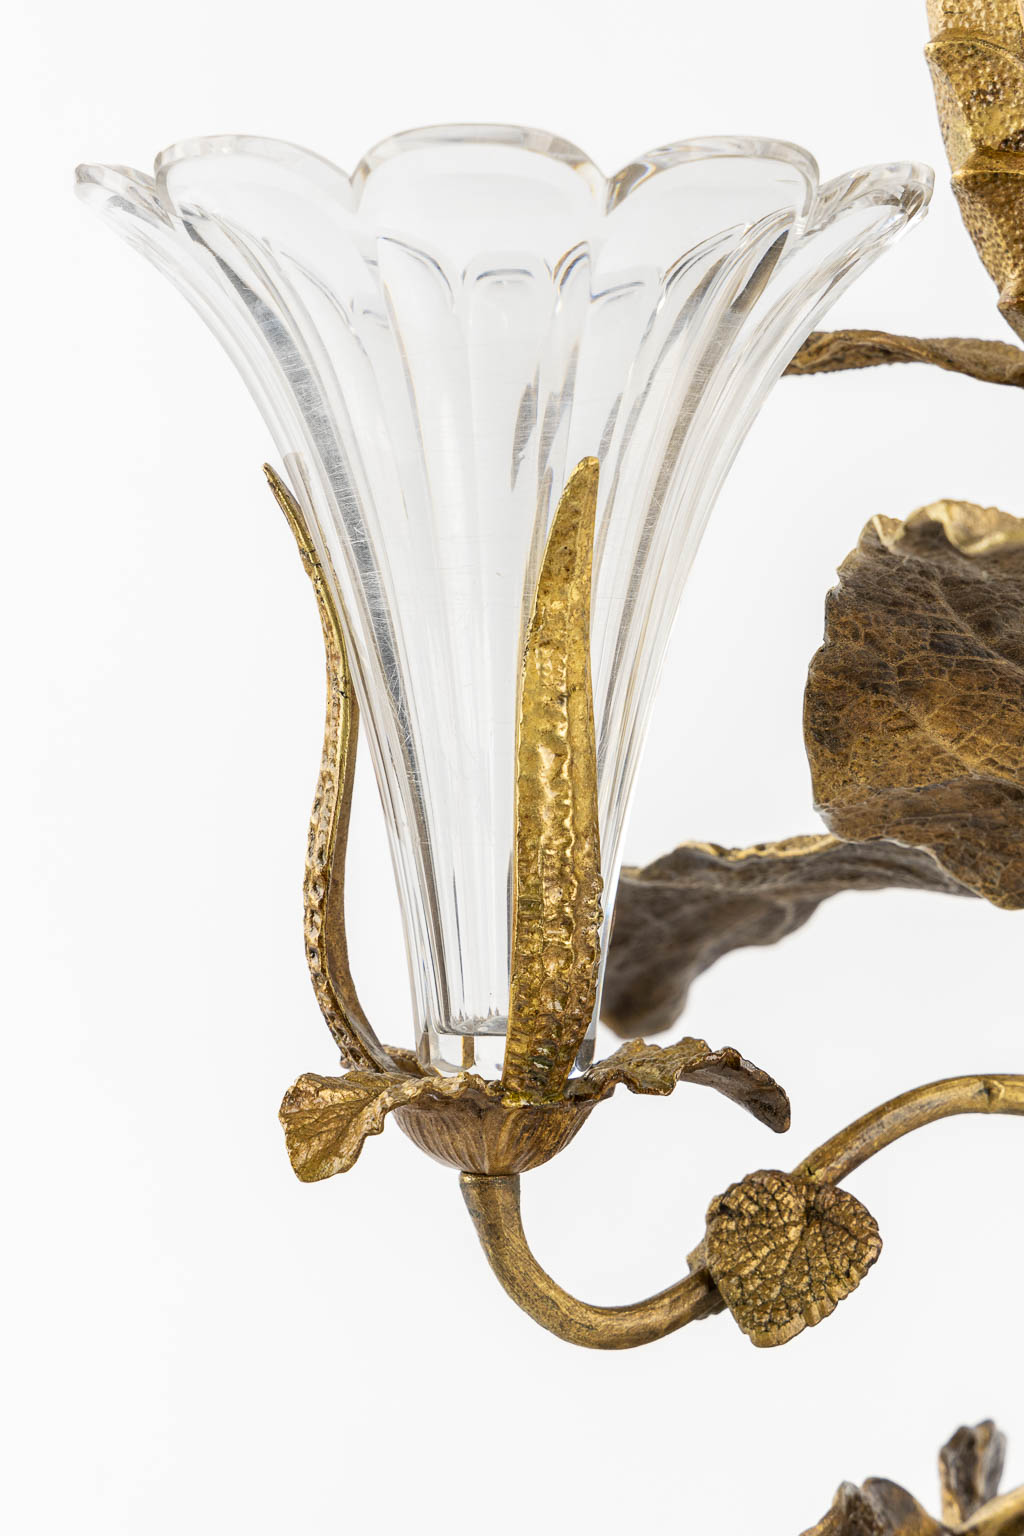 An 'Epergne' or 'Table Centerpiece', bronze and glass trumpet vases. (H:71 x D:44 cm) - Image 7 of 11